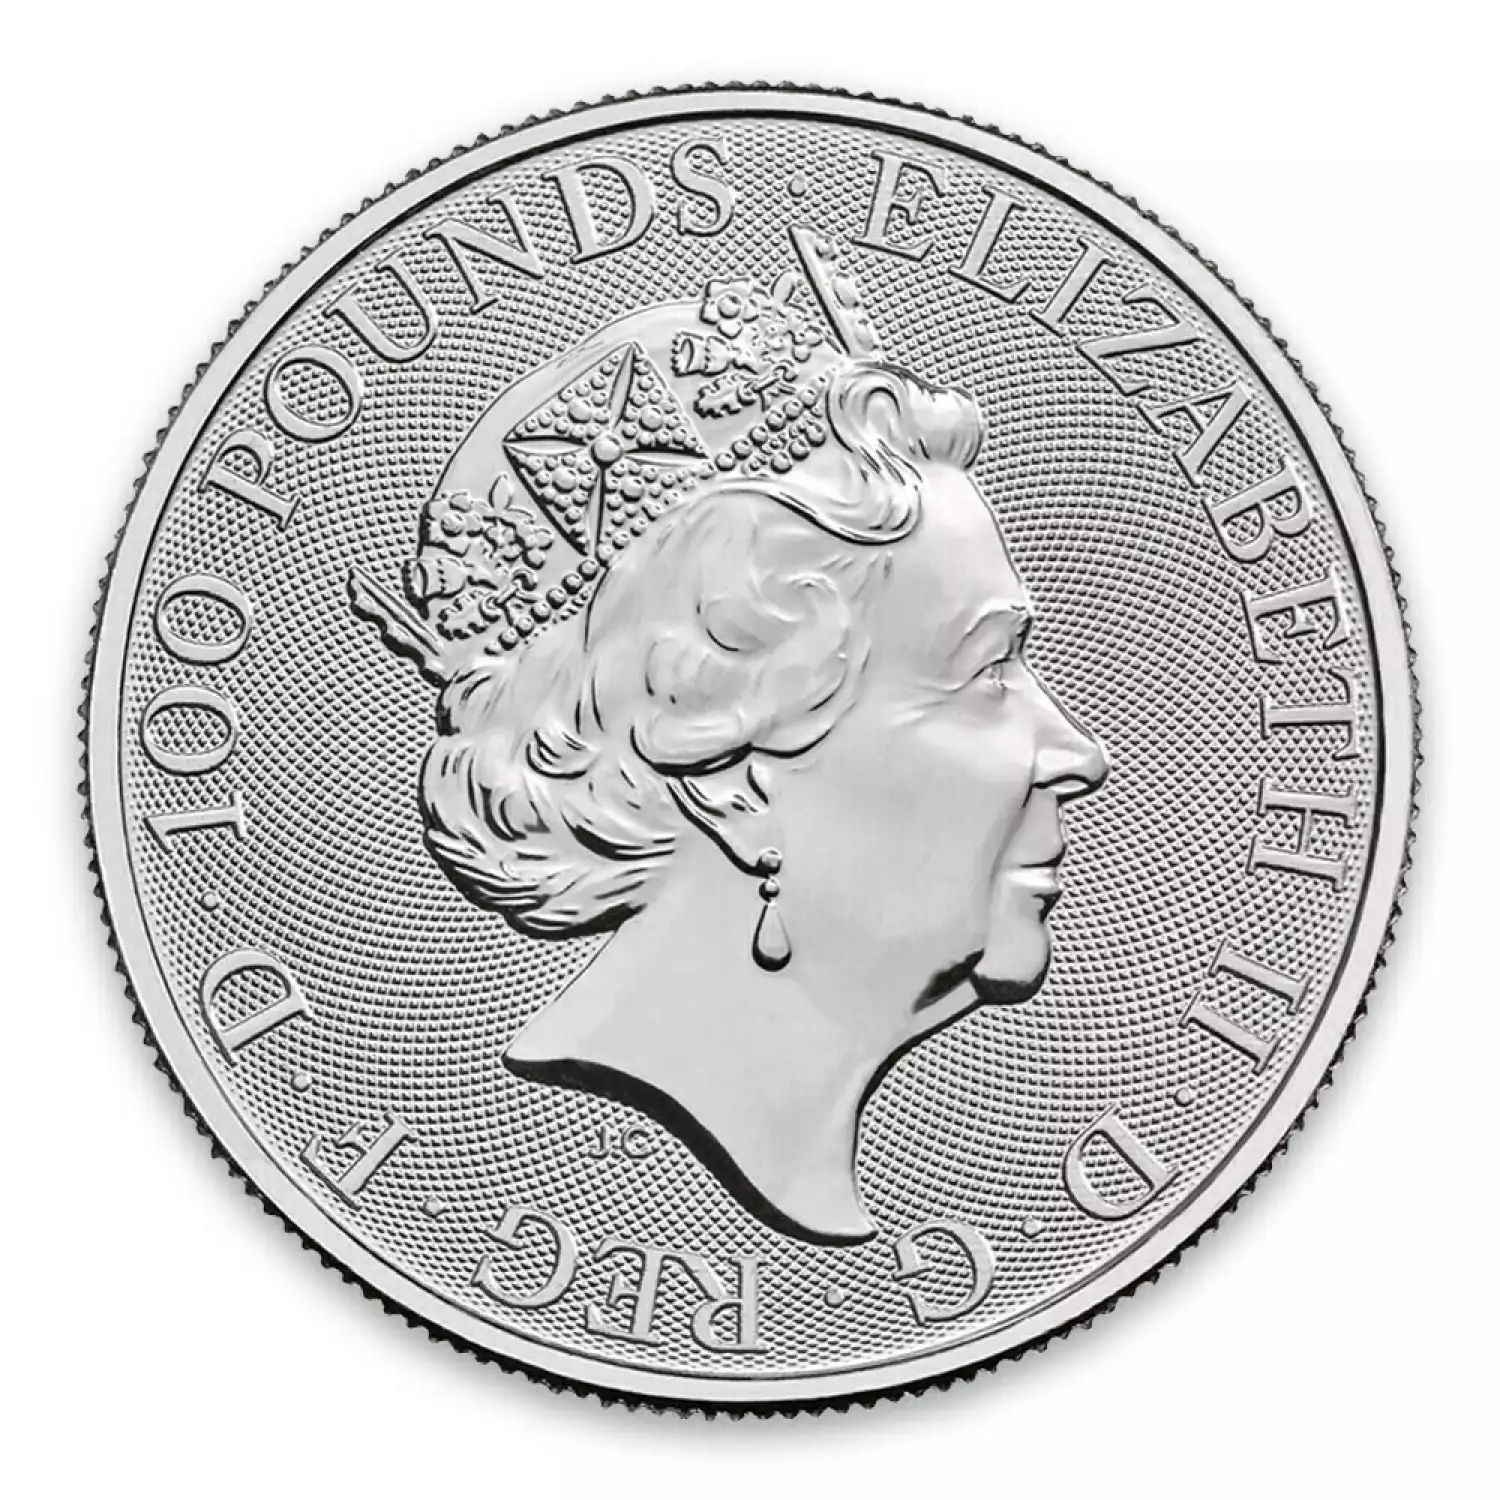 2020 Britain 1 oz Platinum Queen's Beasts The Yale of Beaufort (2)